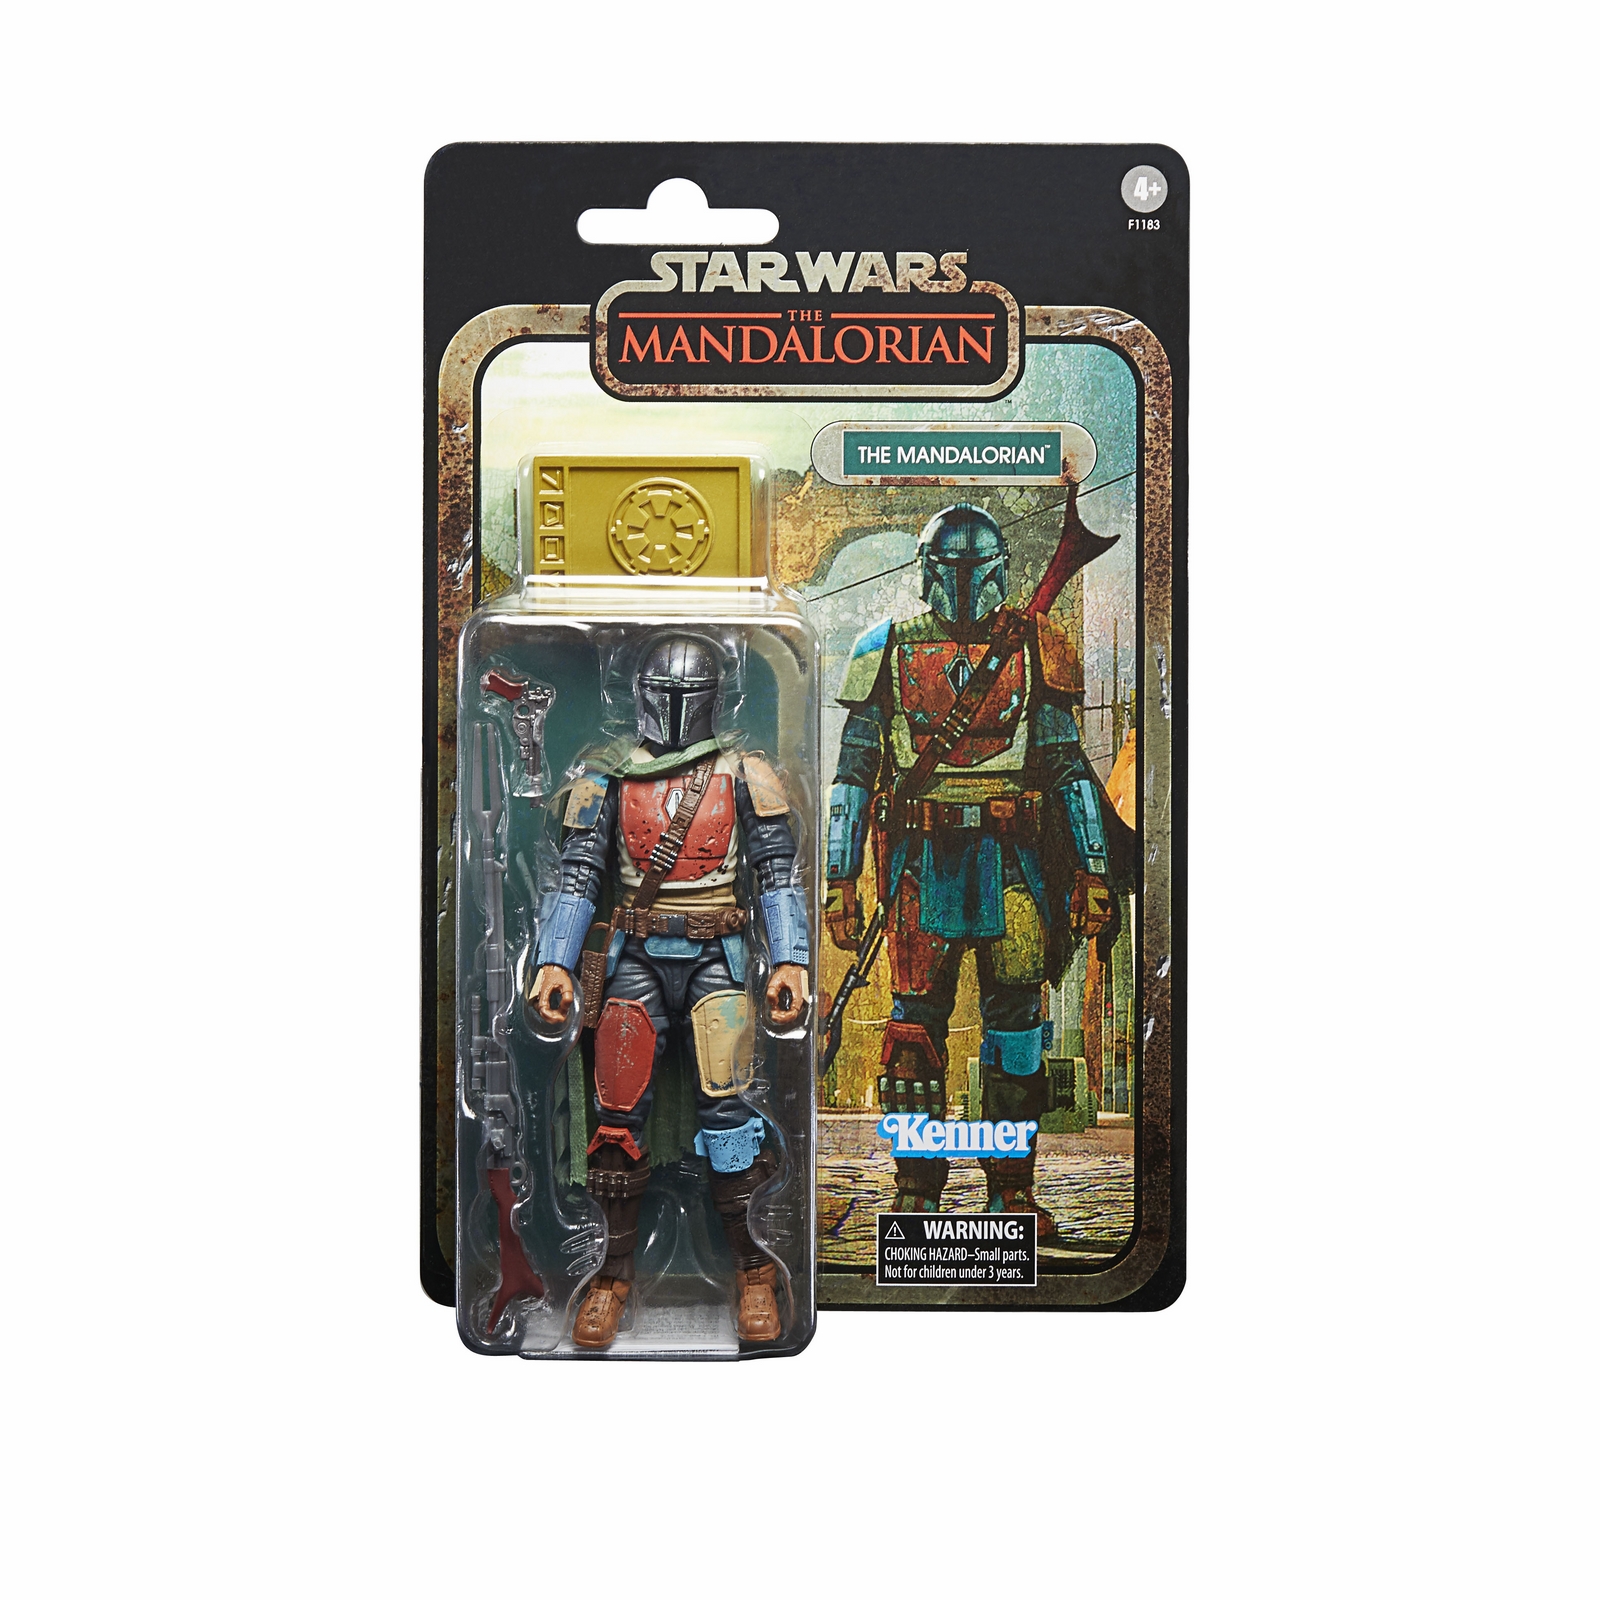 STAR WARS THE BLACK SERIES CREDIT COLLECTION 6-INCH THE MANDALORIAN Figure - inpck 2.jpg